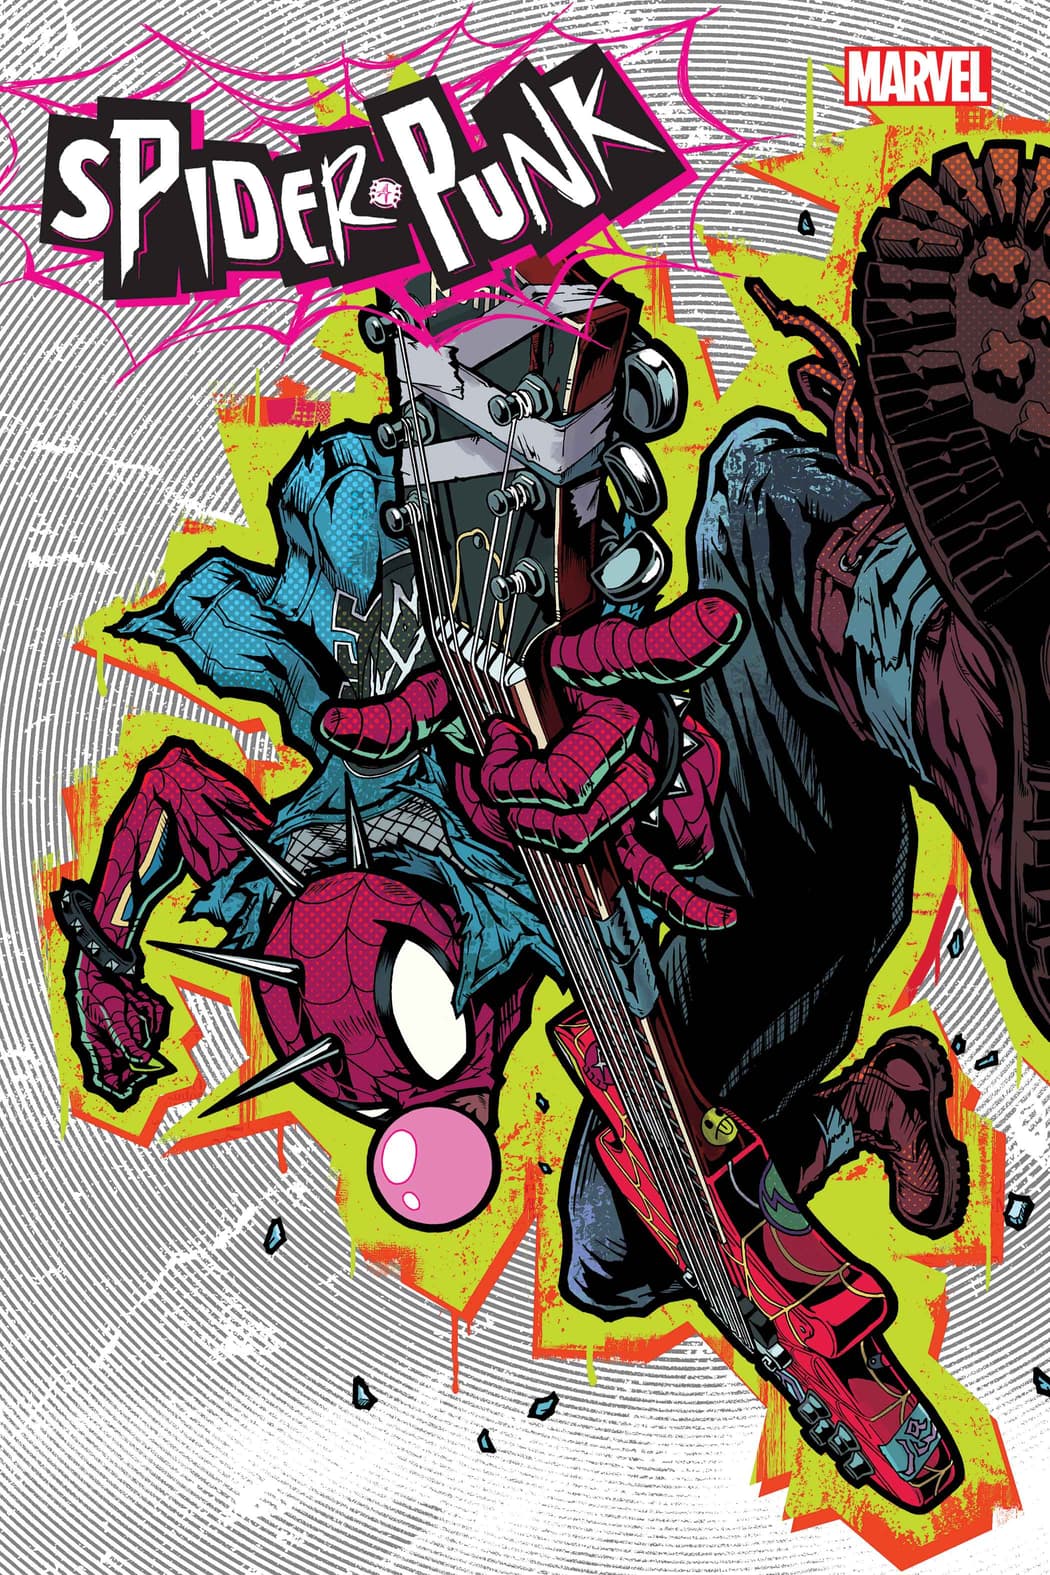 Spider-Punk: Everything you need to know about the Spider-Verse's anarchic  hero